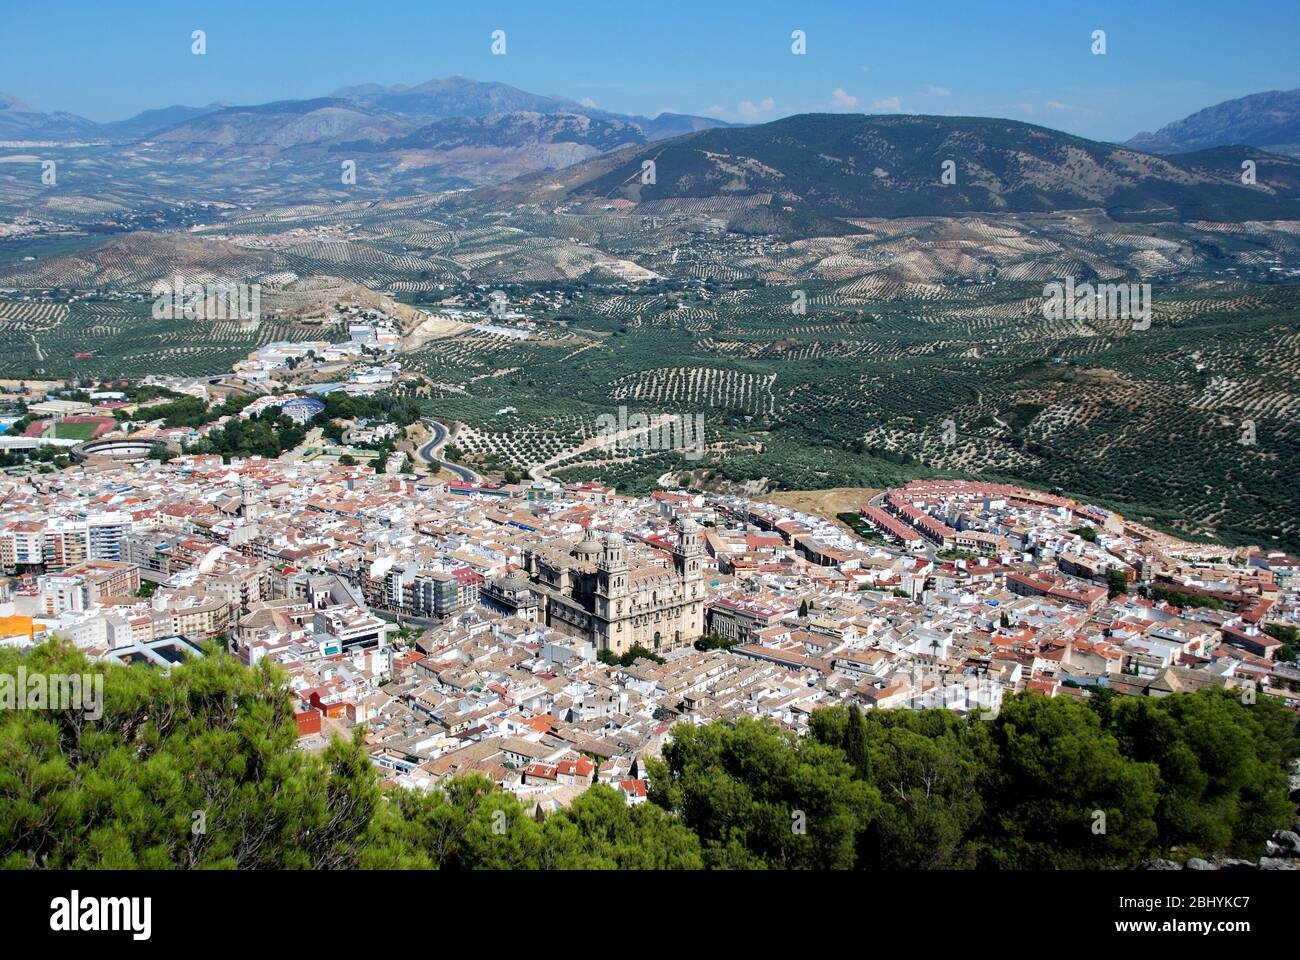 View across the city rooftops with the Cathedral in the centre, Jaen, Jaen Province, Andalucia, Spain, Western Europe Stock Photo